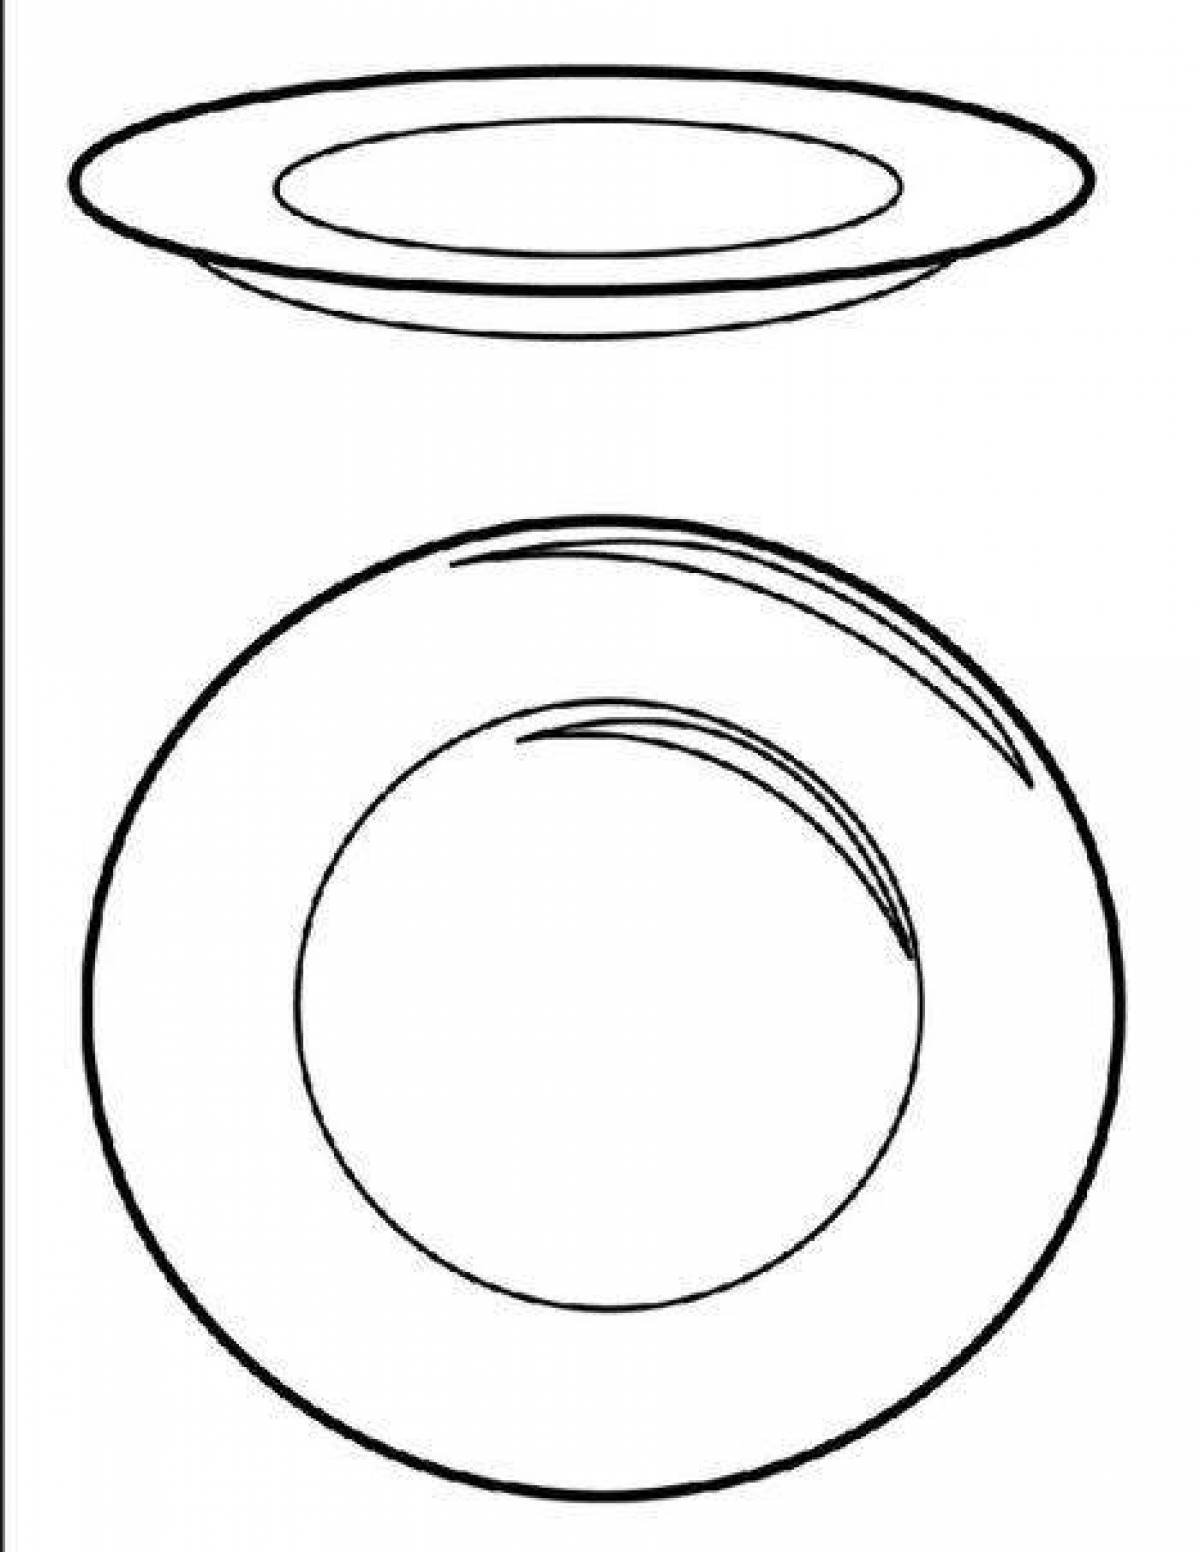 Outstanding plate coloring page for kids